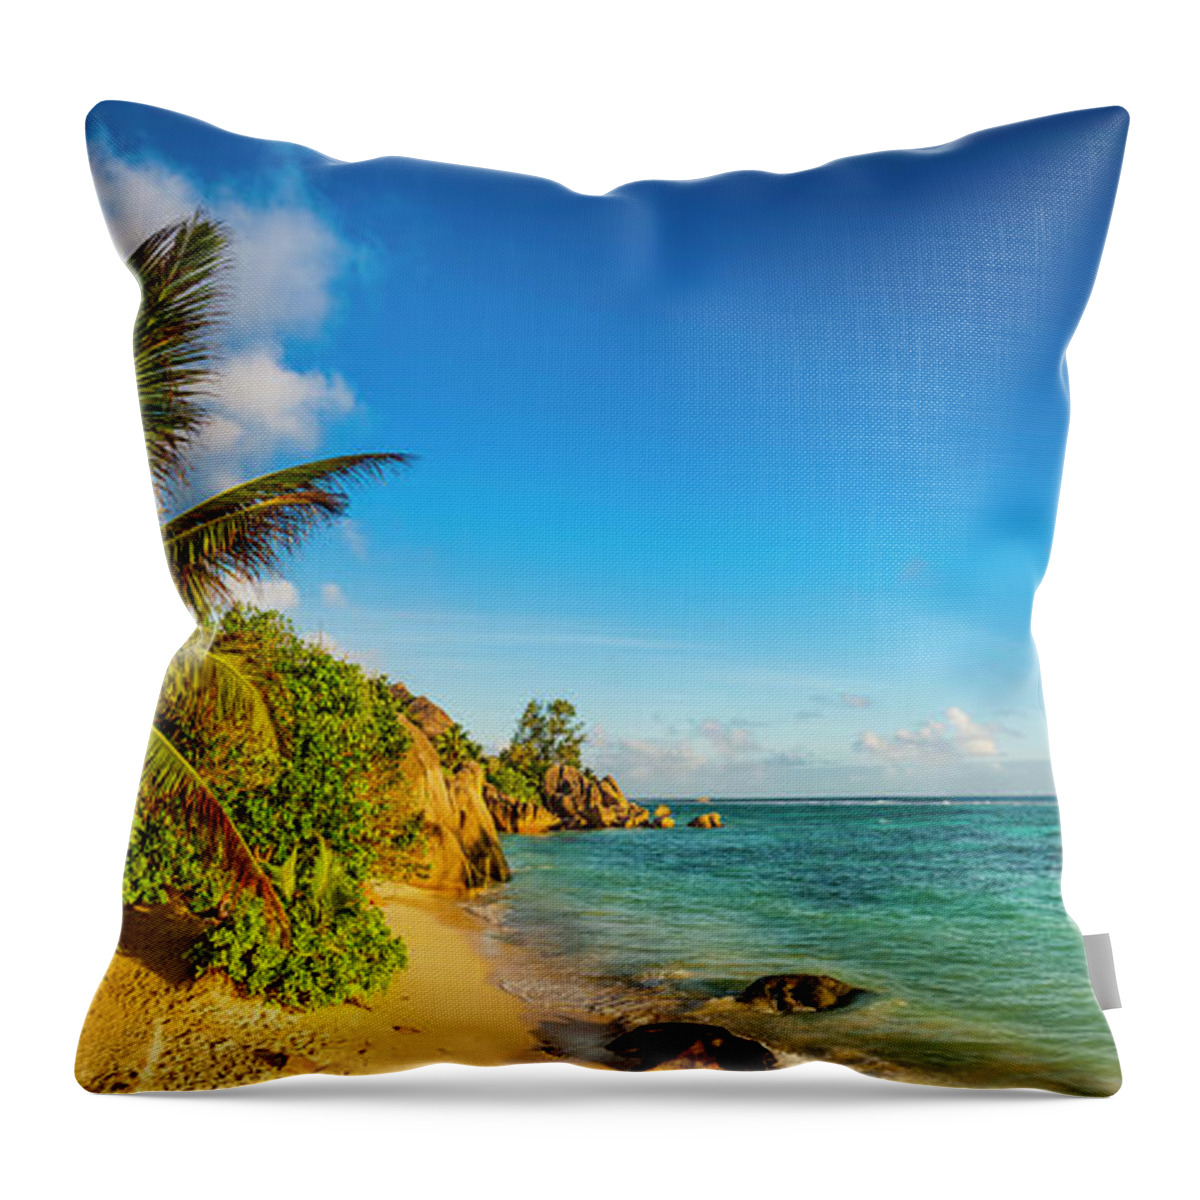 Tropical Rainforest Throw Pillow featuring the photograph Golden Sand Beach Swaying Palm Trees by Fotovoyager